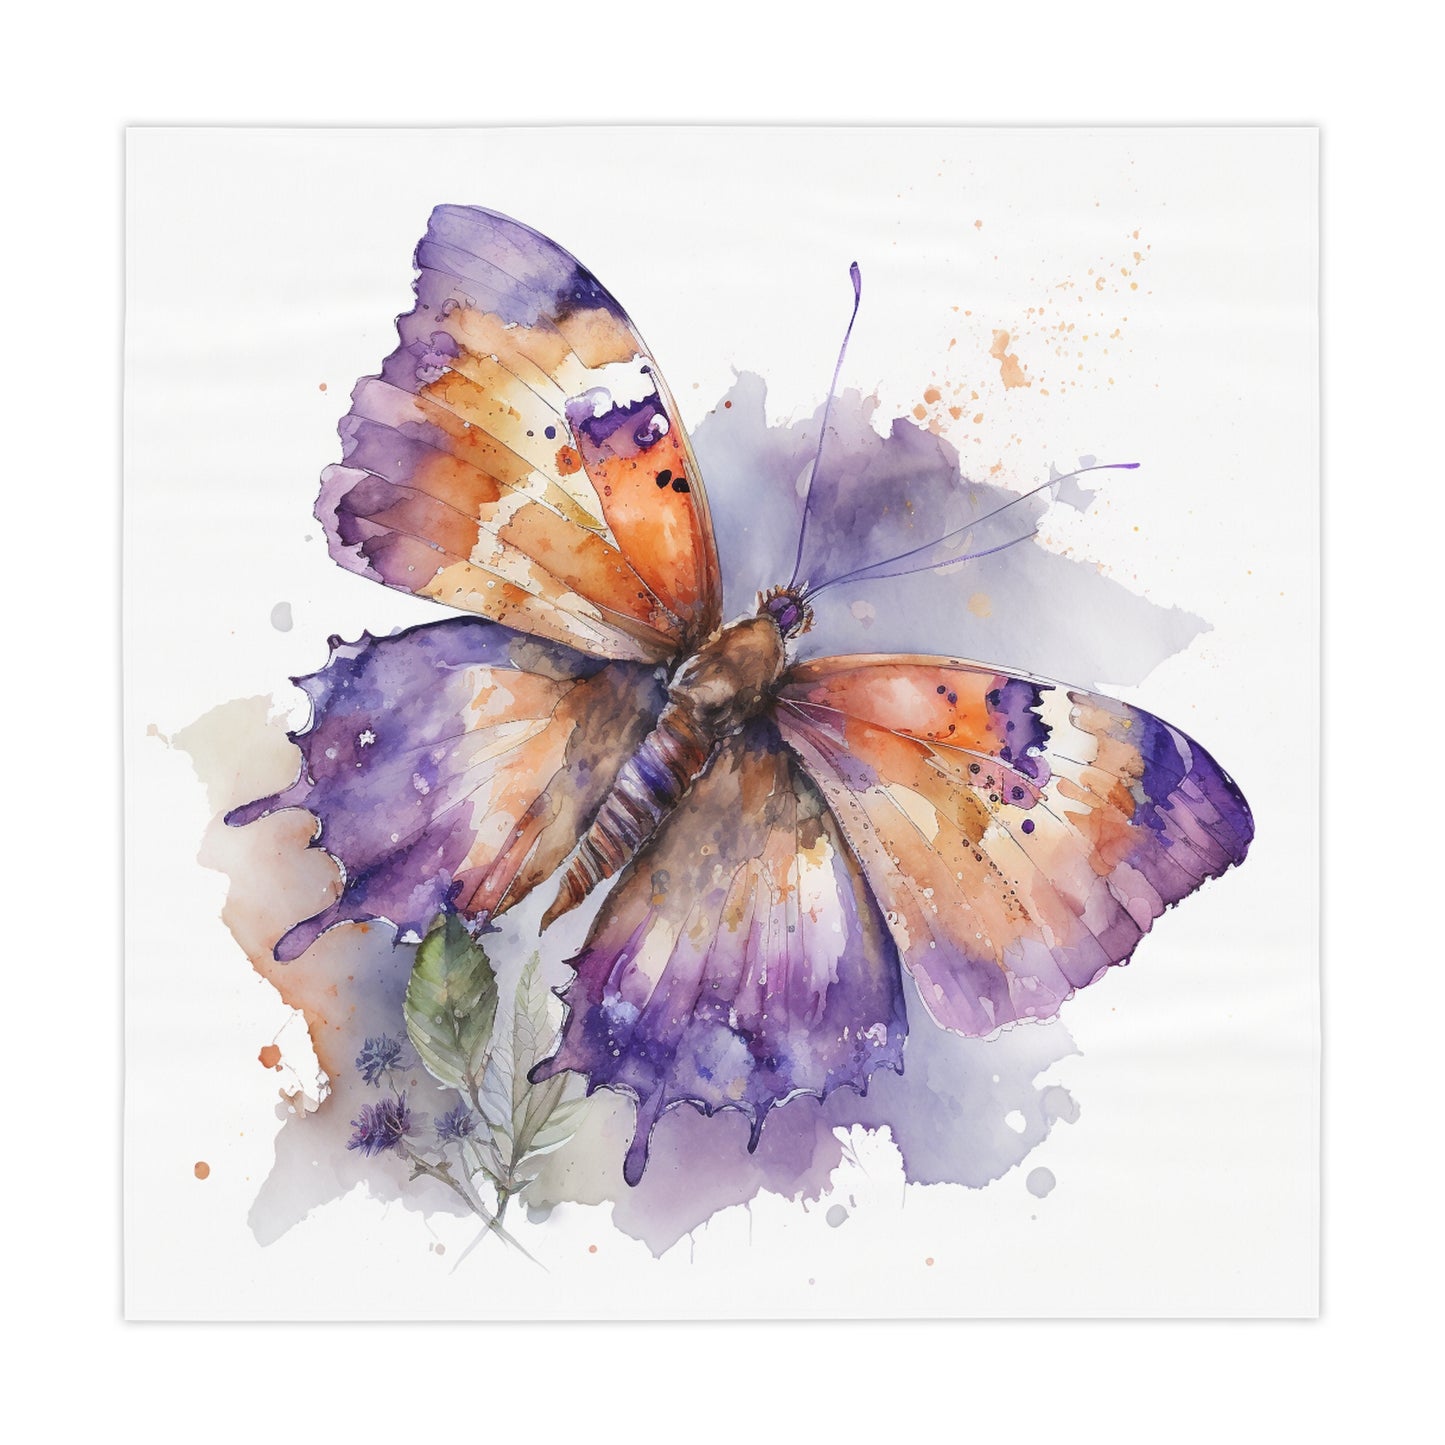 Tablecloth MerlinRose Watercolor Butterfly 1